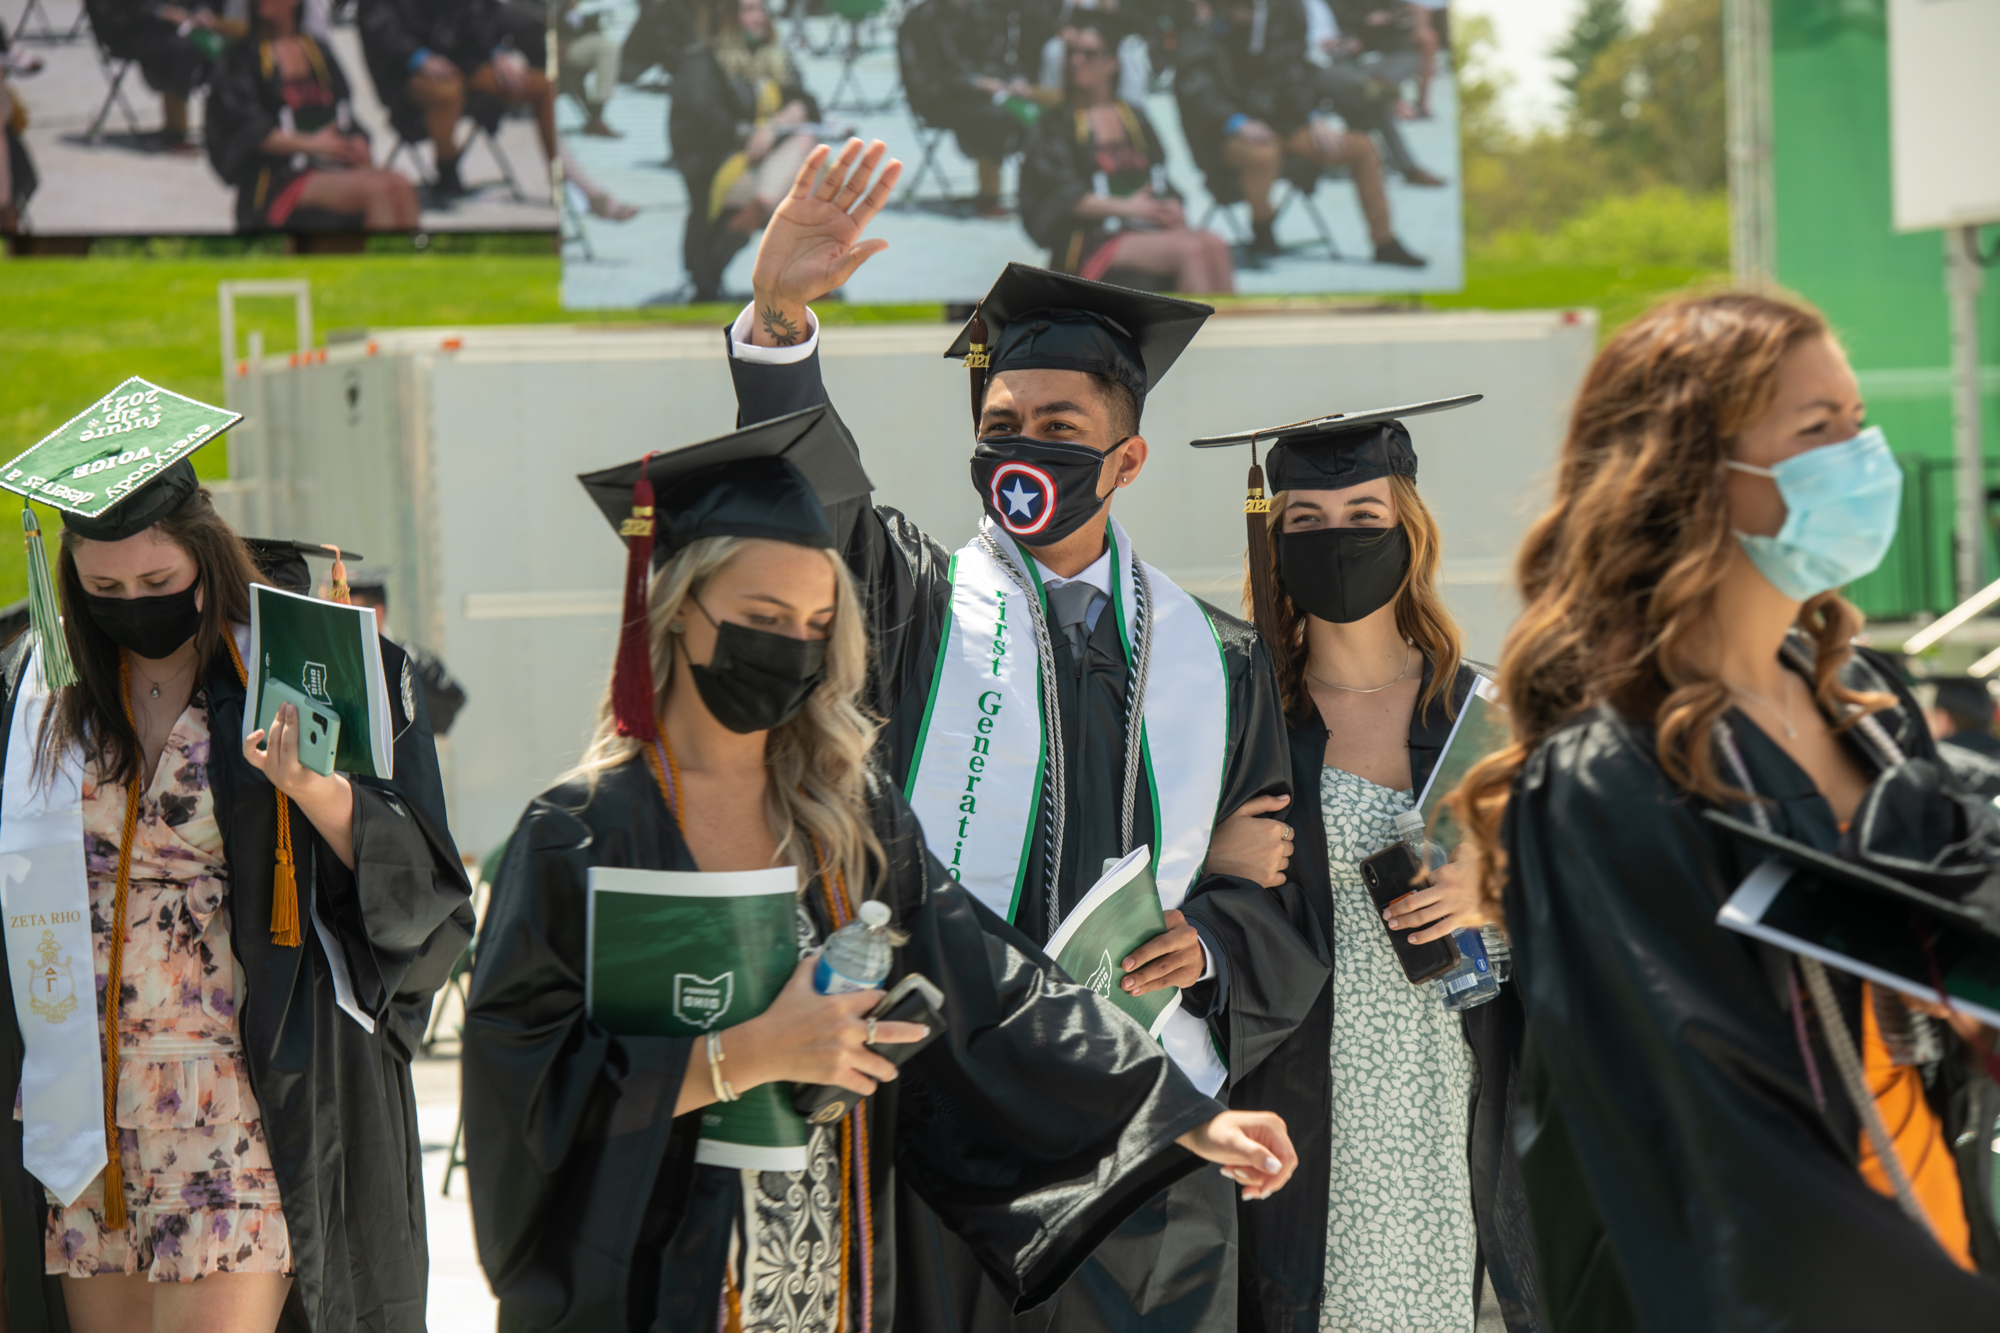 Graduating students enter the commencement ceremony with program booklets